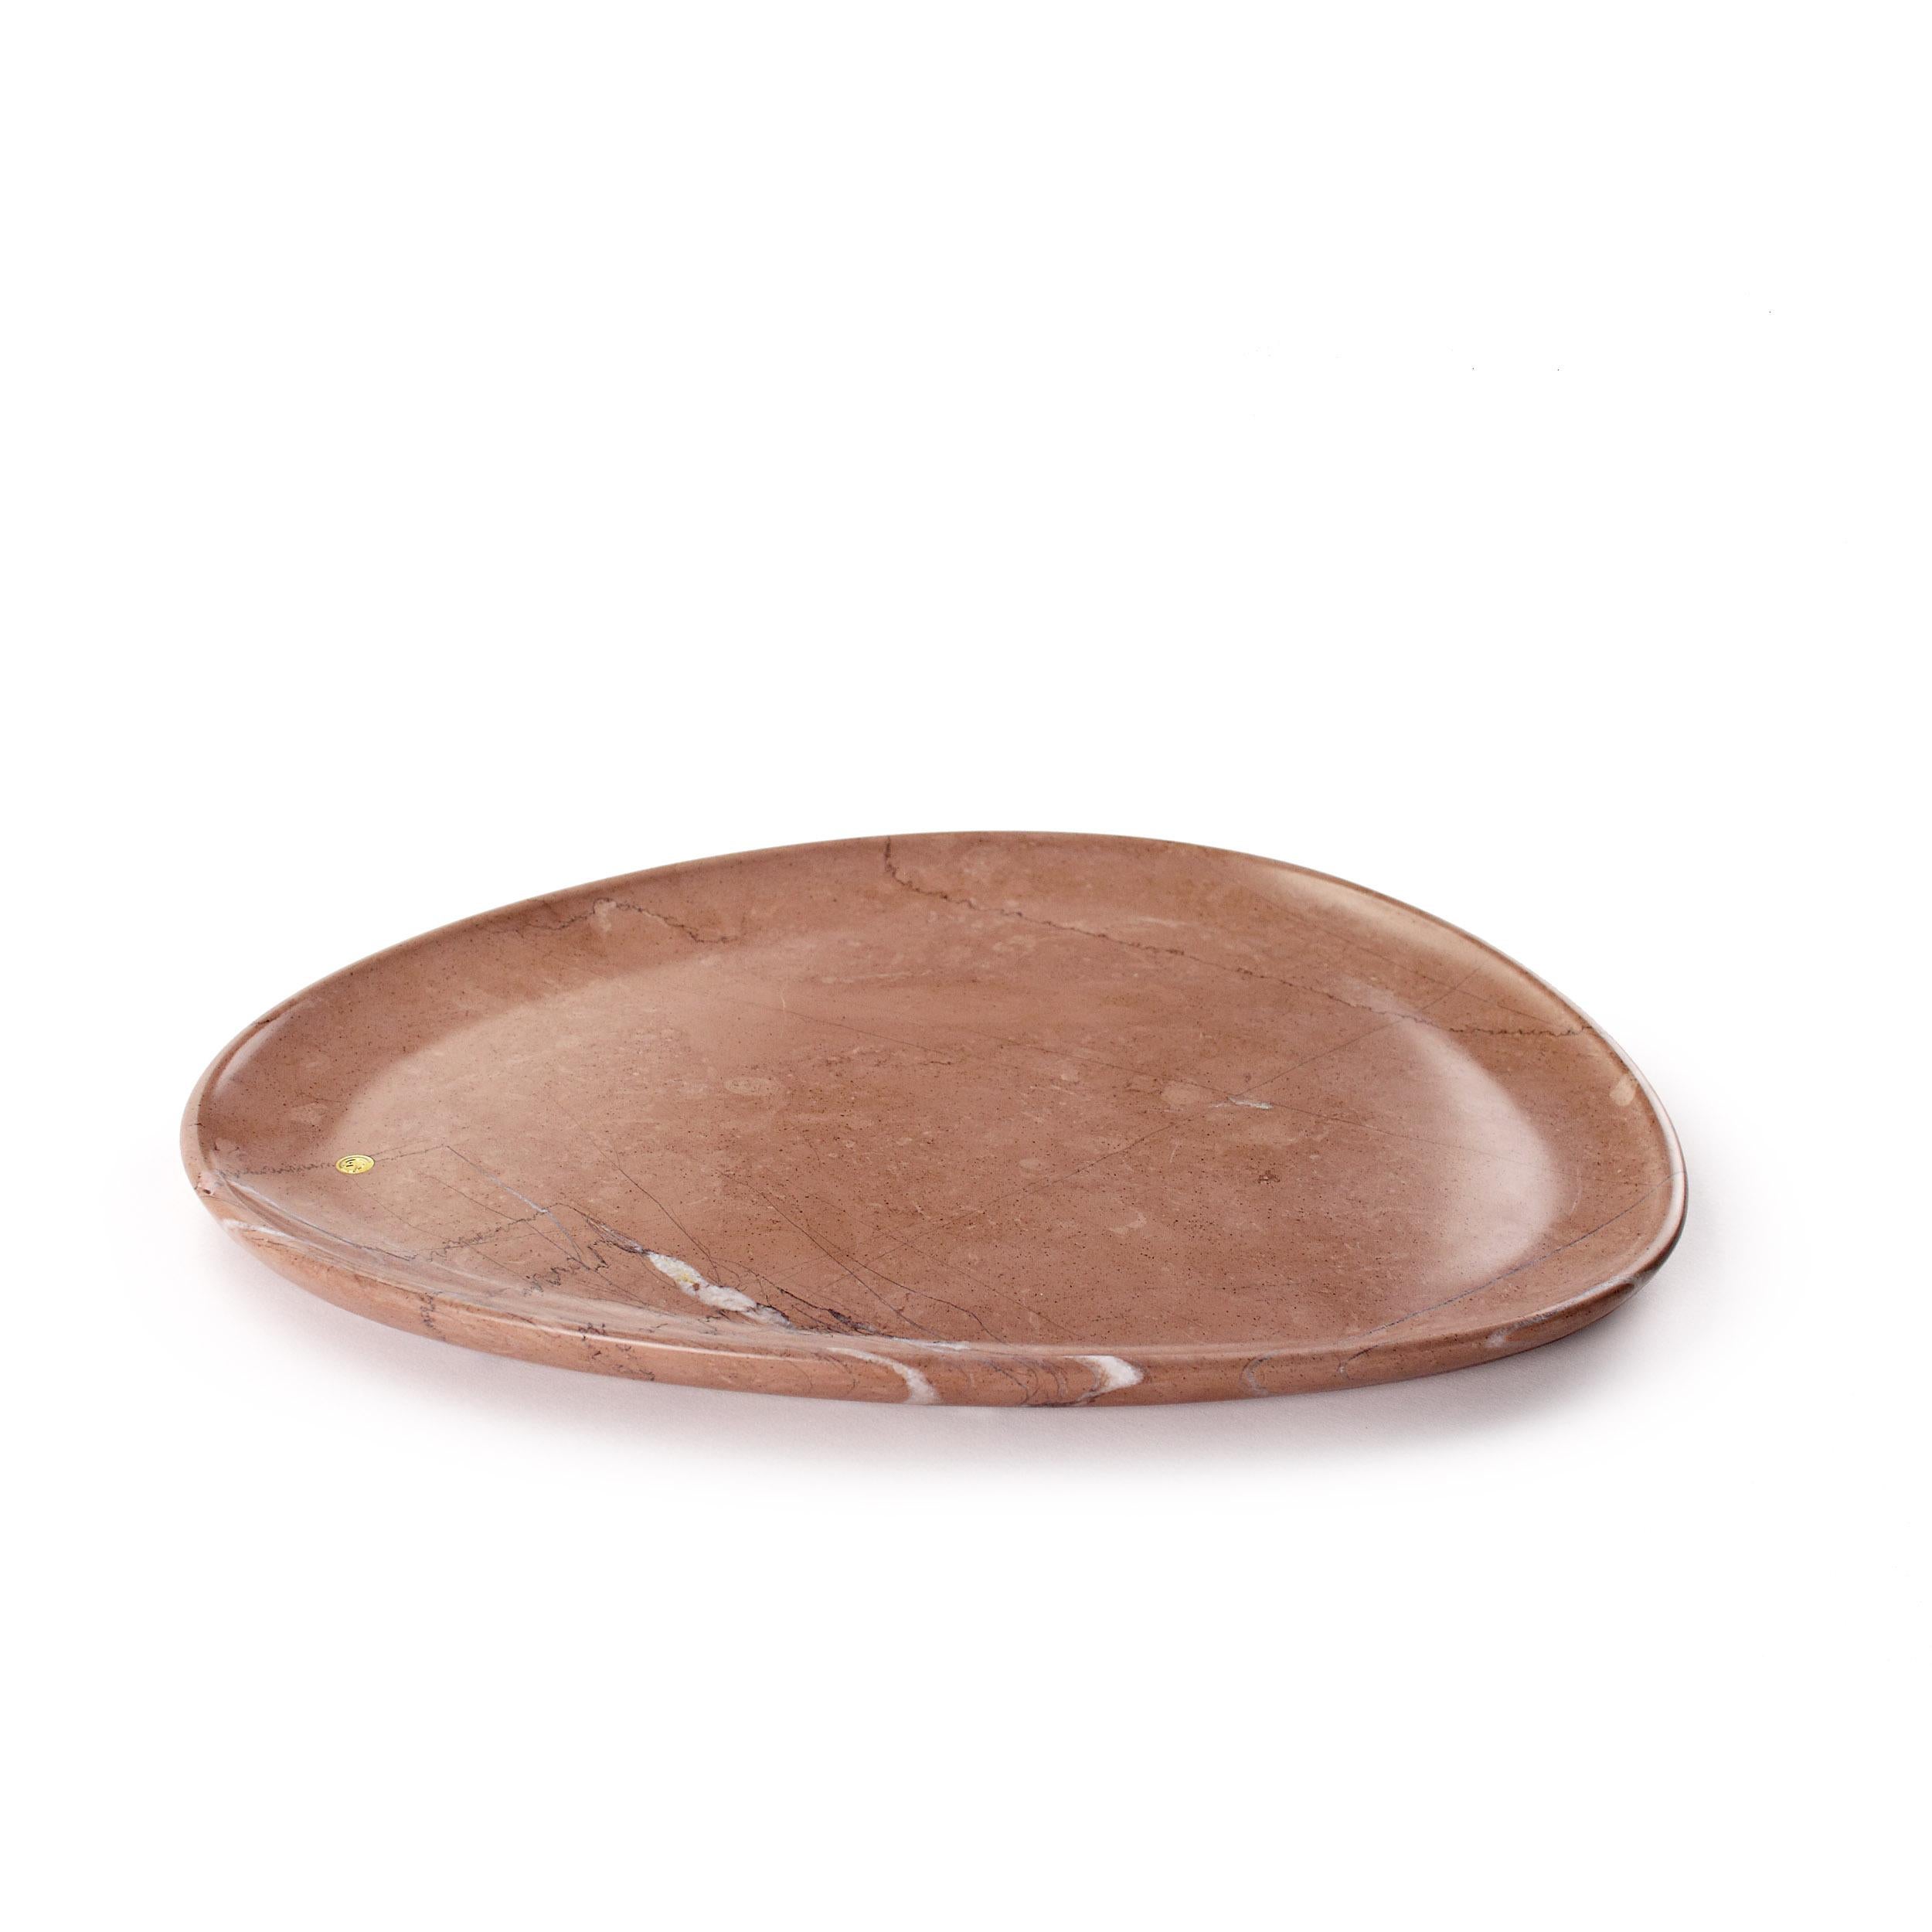 Hand carved presentation plate from pink Assisi stone. Multiple use as plates, platters and placers. 

Dimensions: Medium - L 30 W 28 H 1.8 cm, also available: Small - L 24 W 20 H 1.8 cm / Big - L 36 W 35 H 1.8 cm.
Available in different marbles,